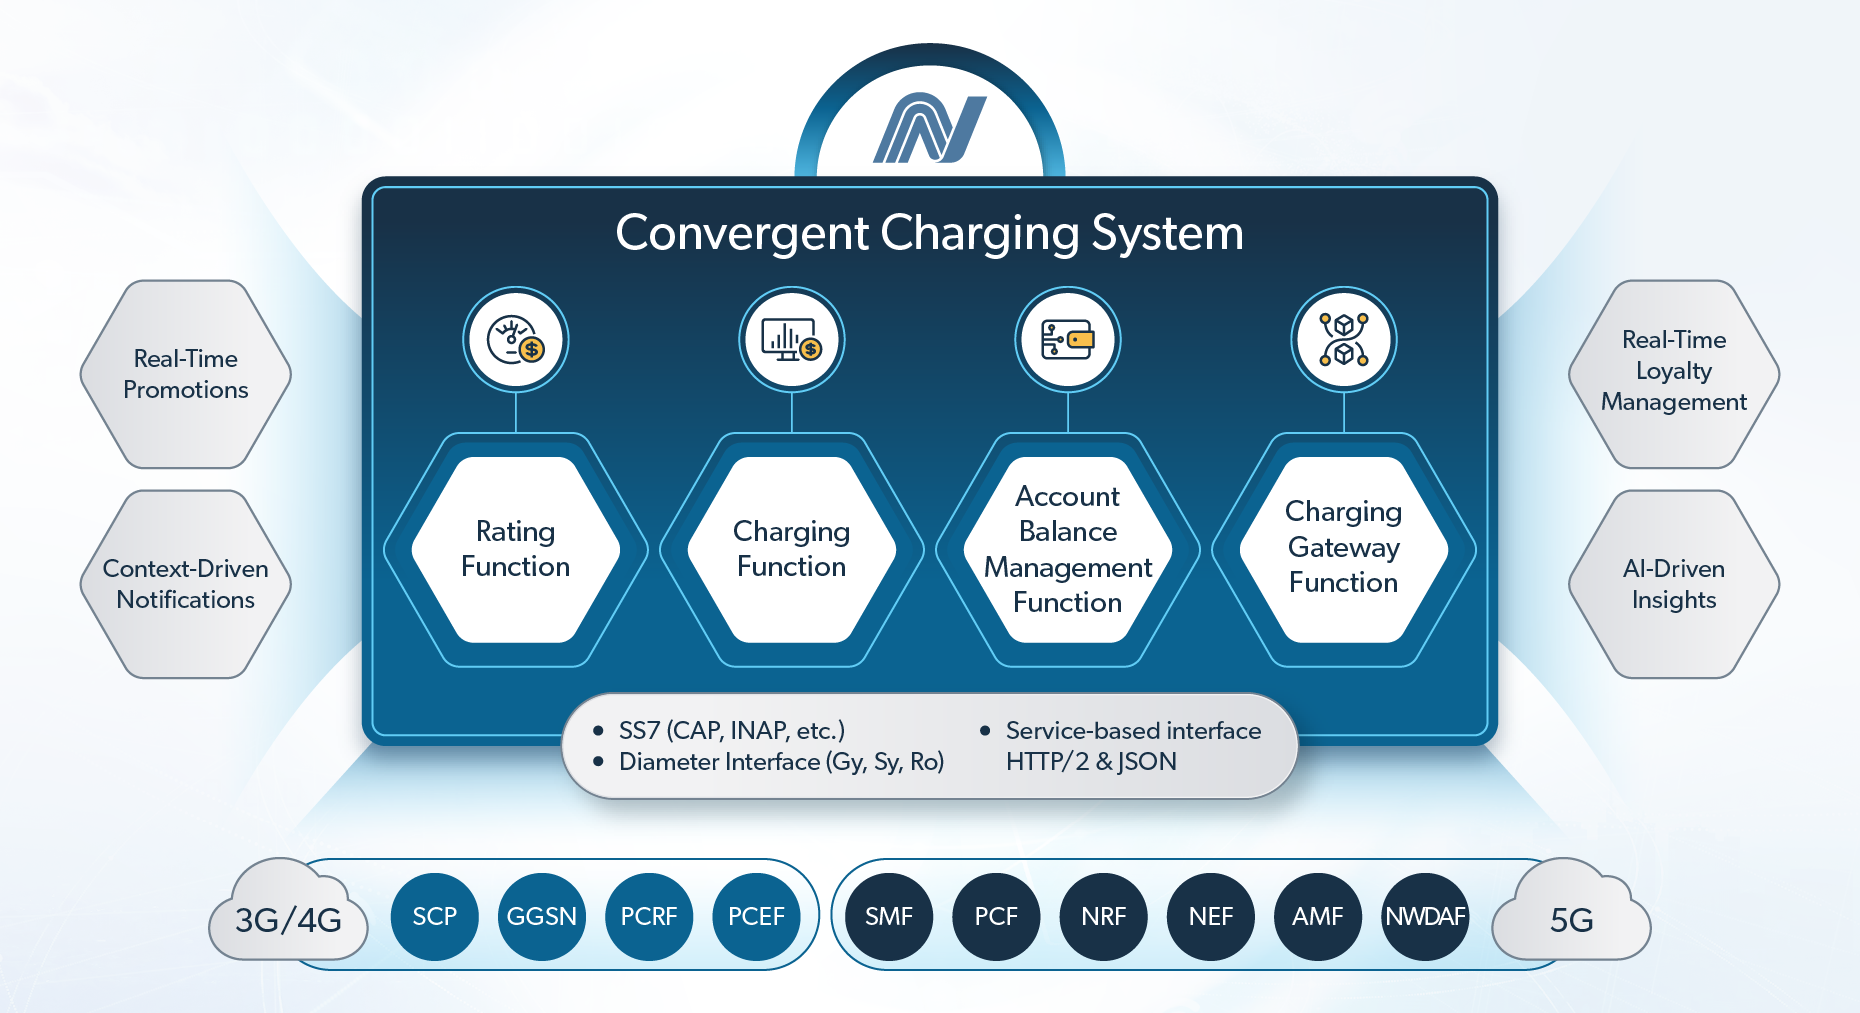 Converged Charging System